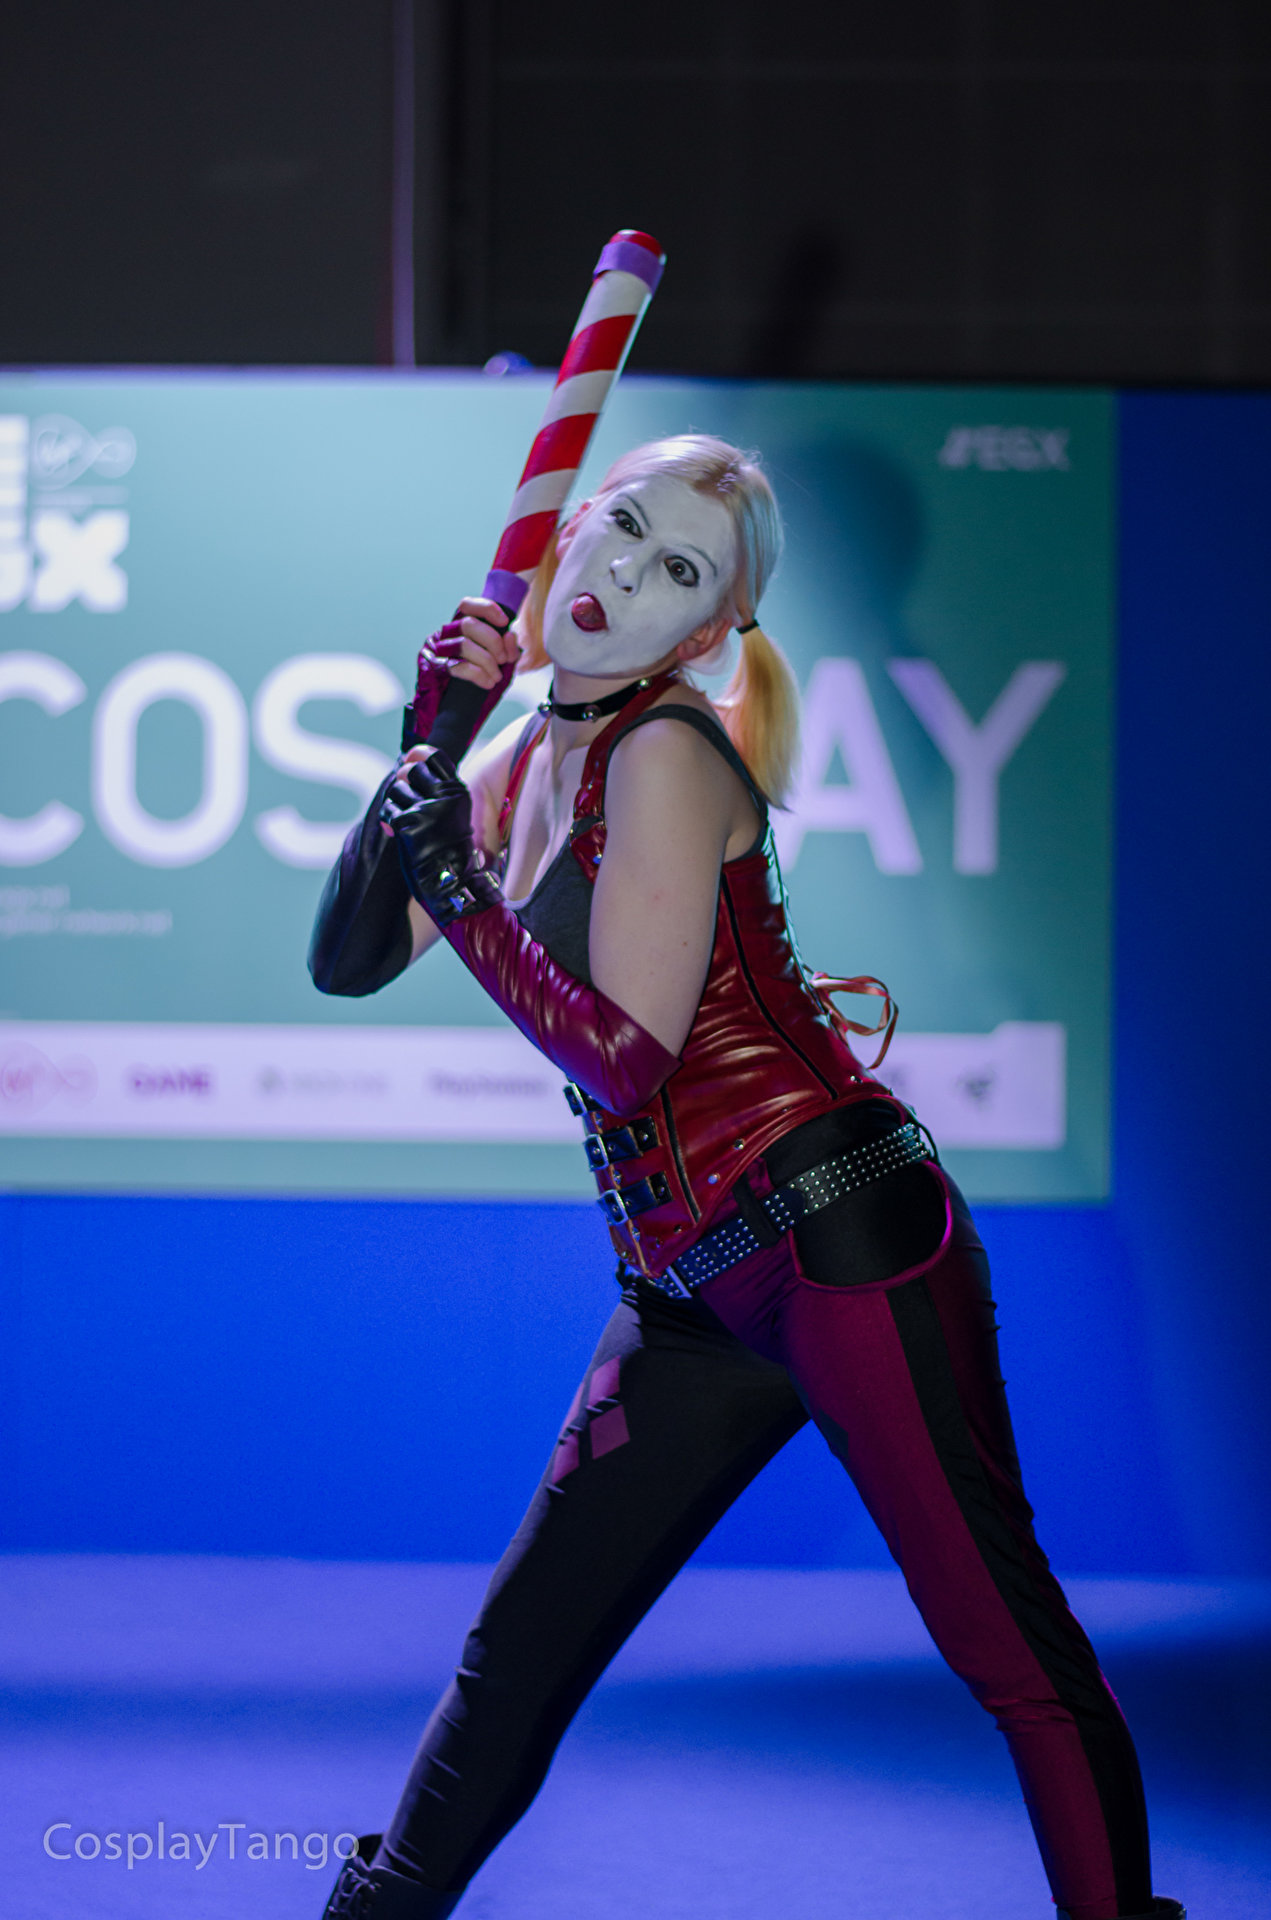 Cospix.net photo featuring LipRipper Cosplay